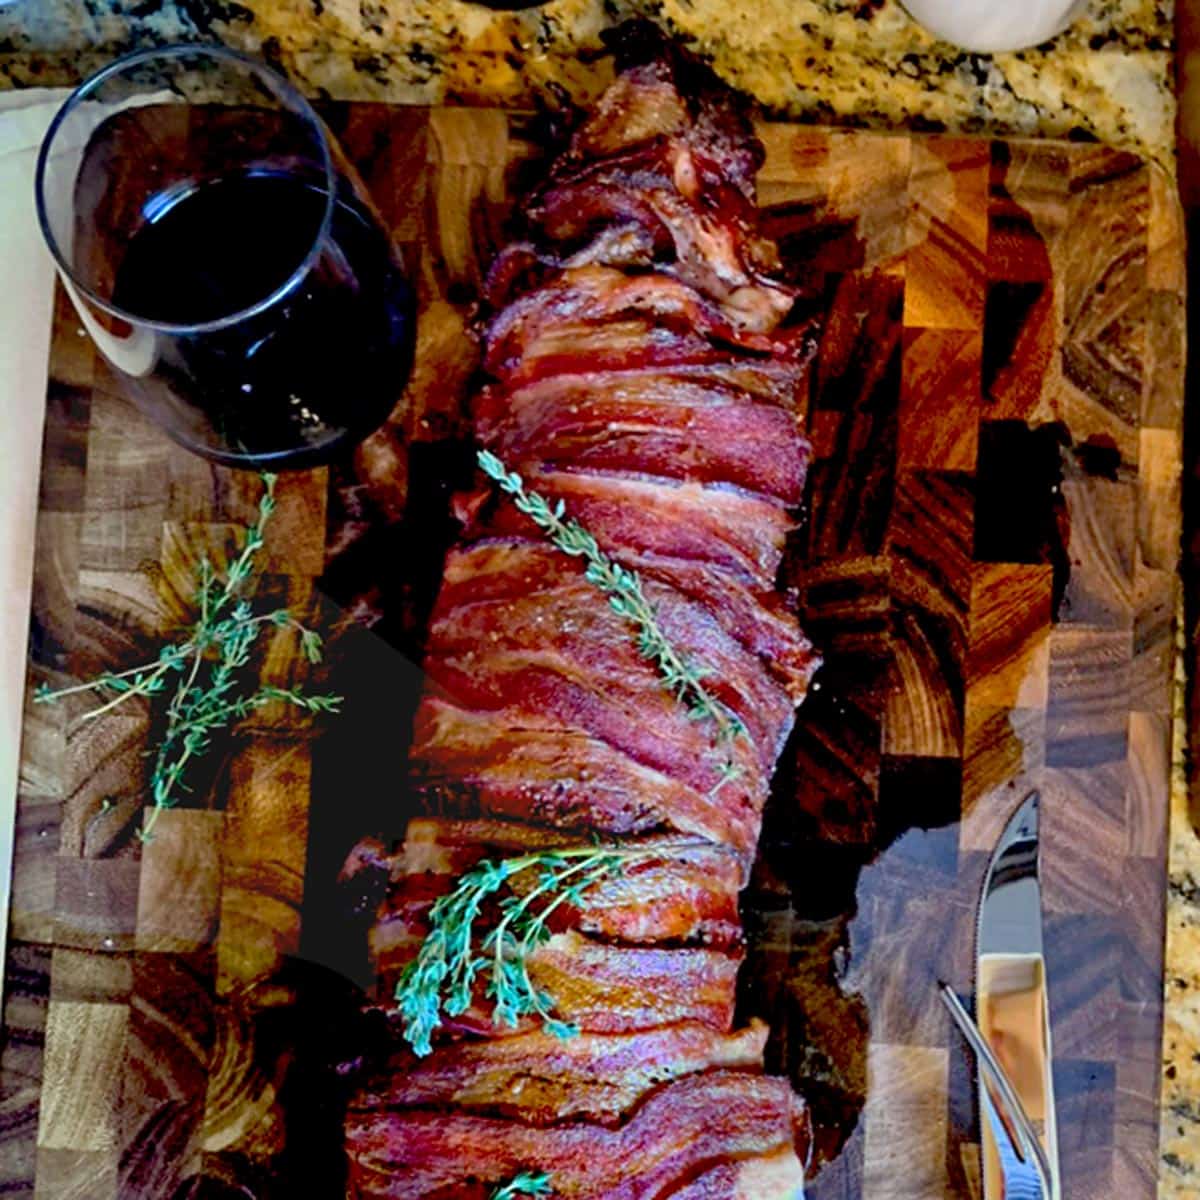 A whole beef tenderloin roast wrapped in bacon and sitting on a cutting board.